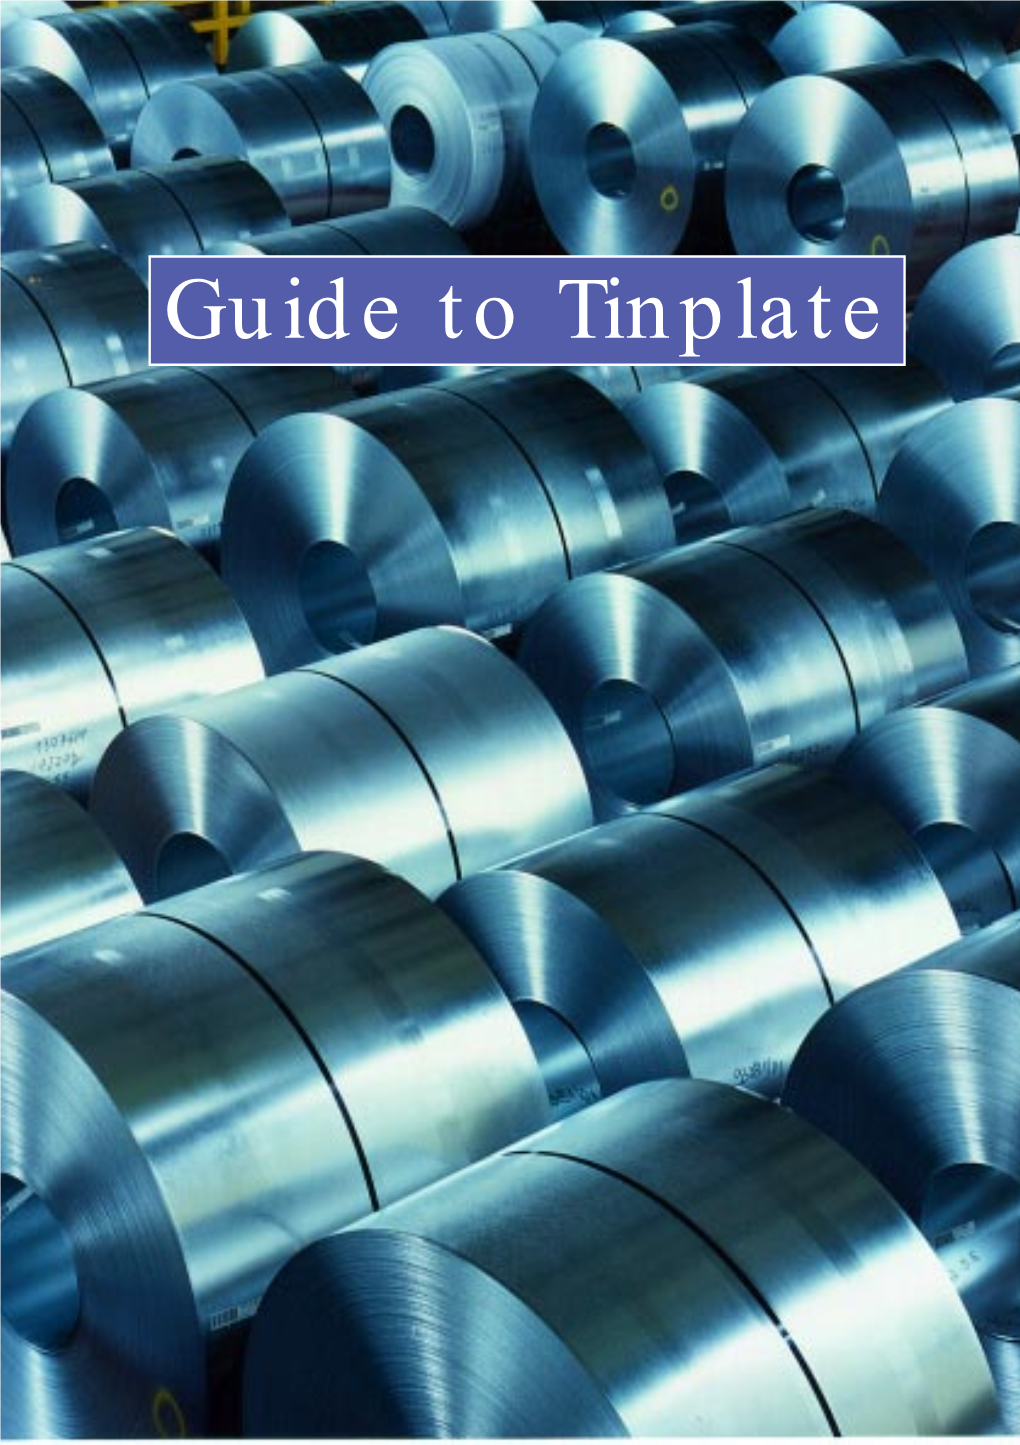 Guide to Tinplate